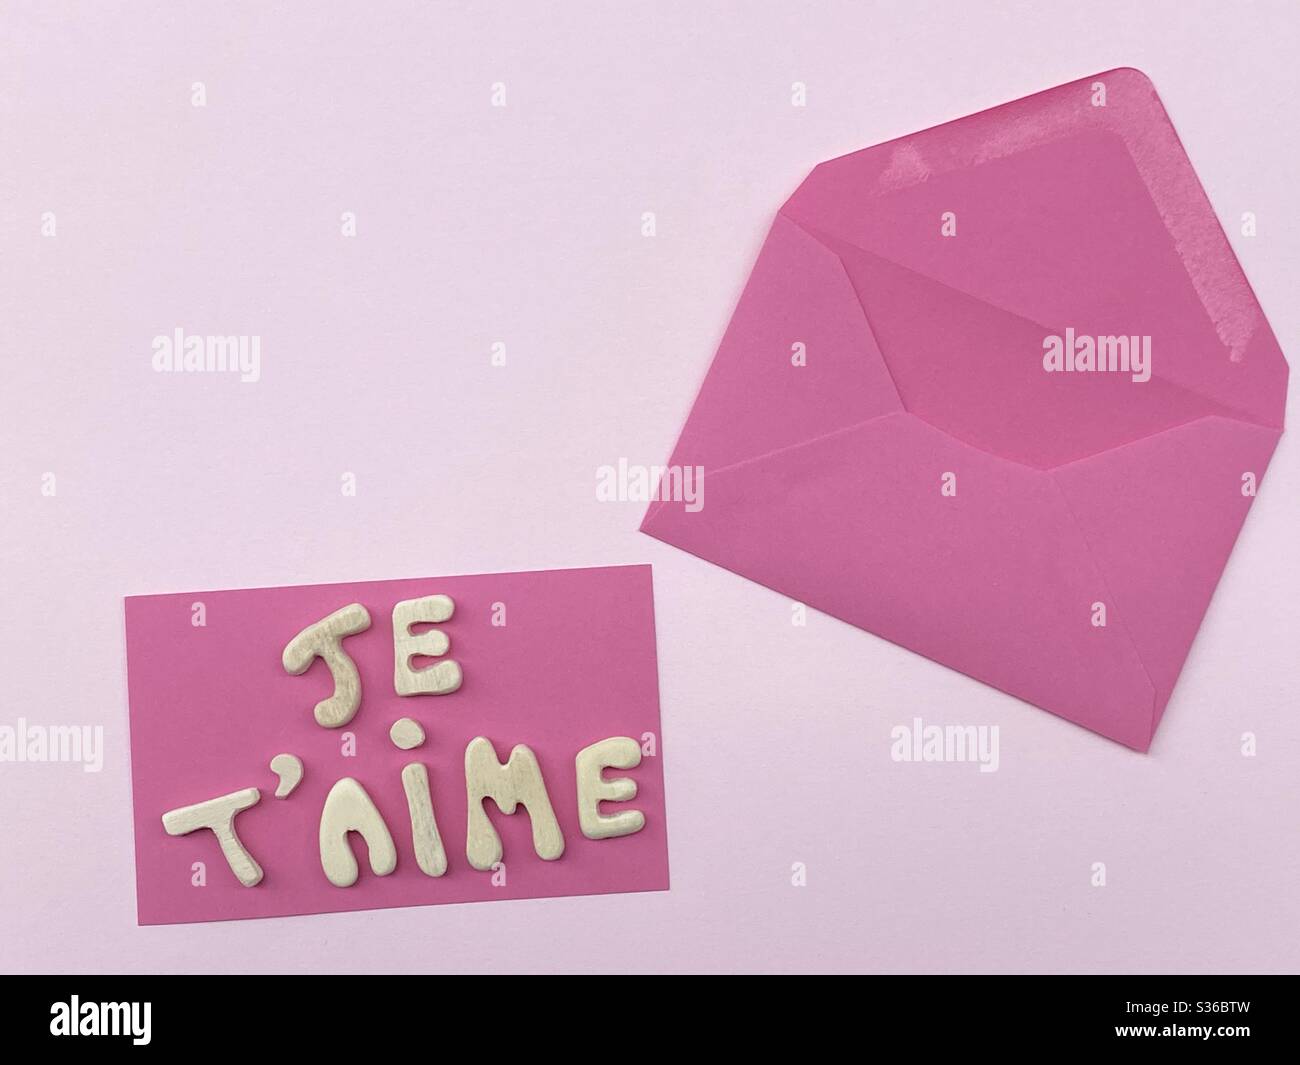 Je t’aime, french text meaning I love you composed with handmade wooden letters over pink color Stock Photo